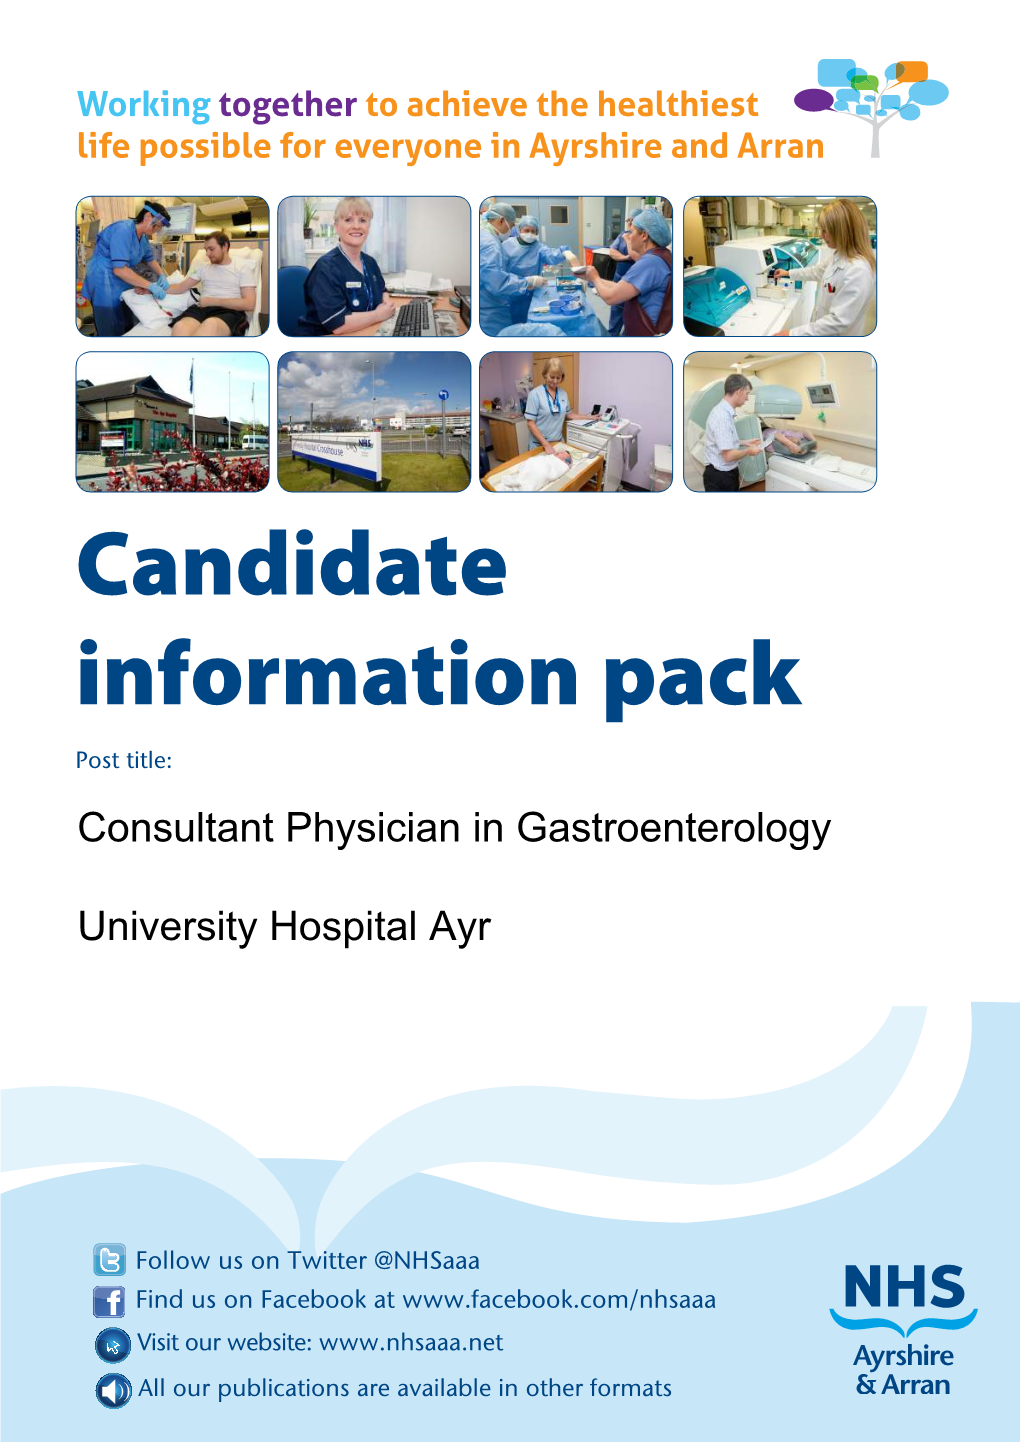 Candidate Information Pack Post Title: Consultant Physician in Gastroenterology